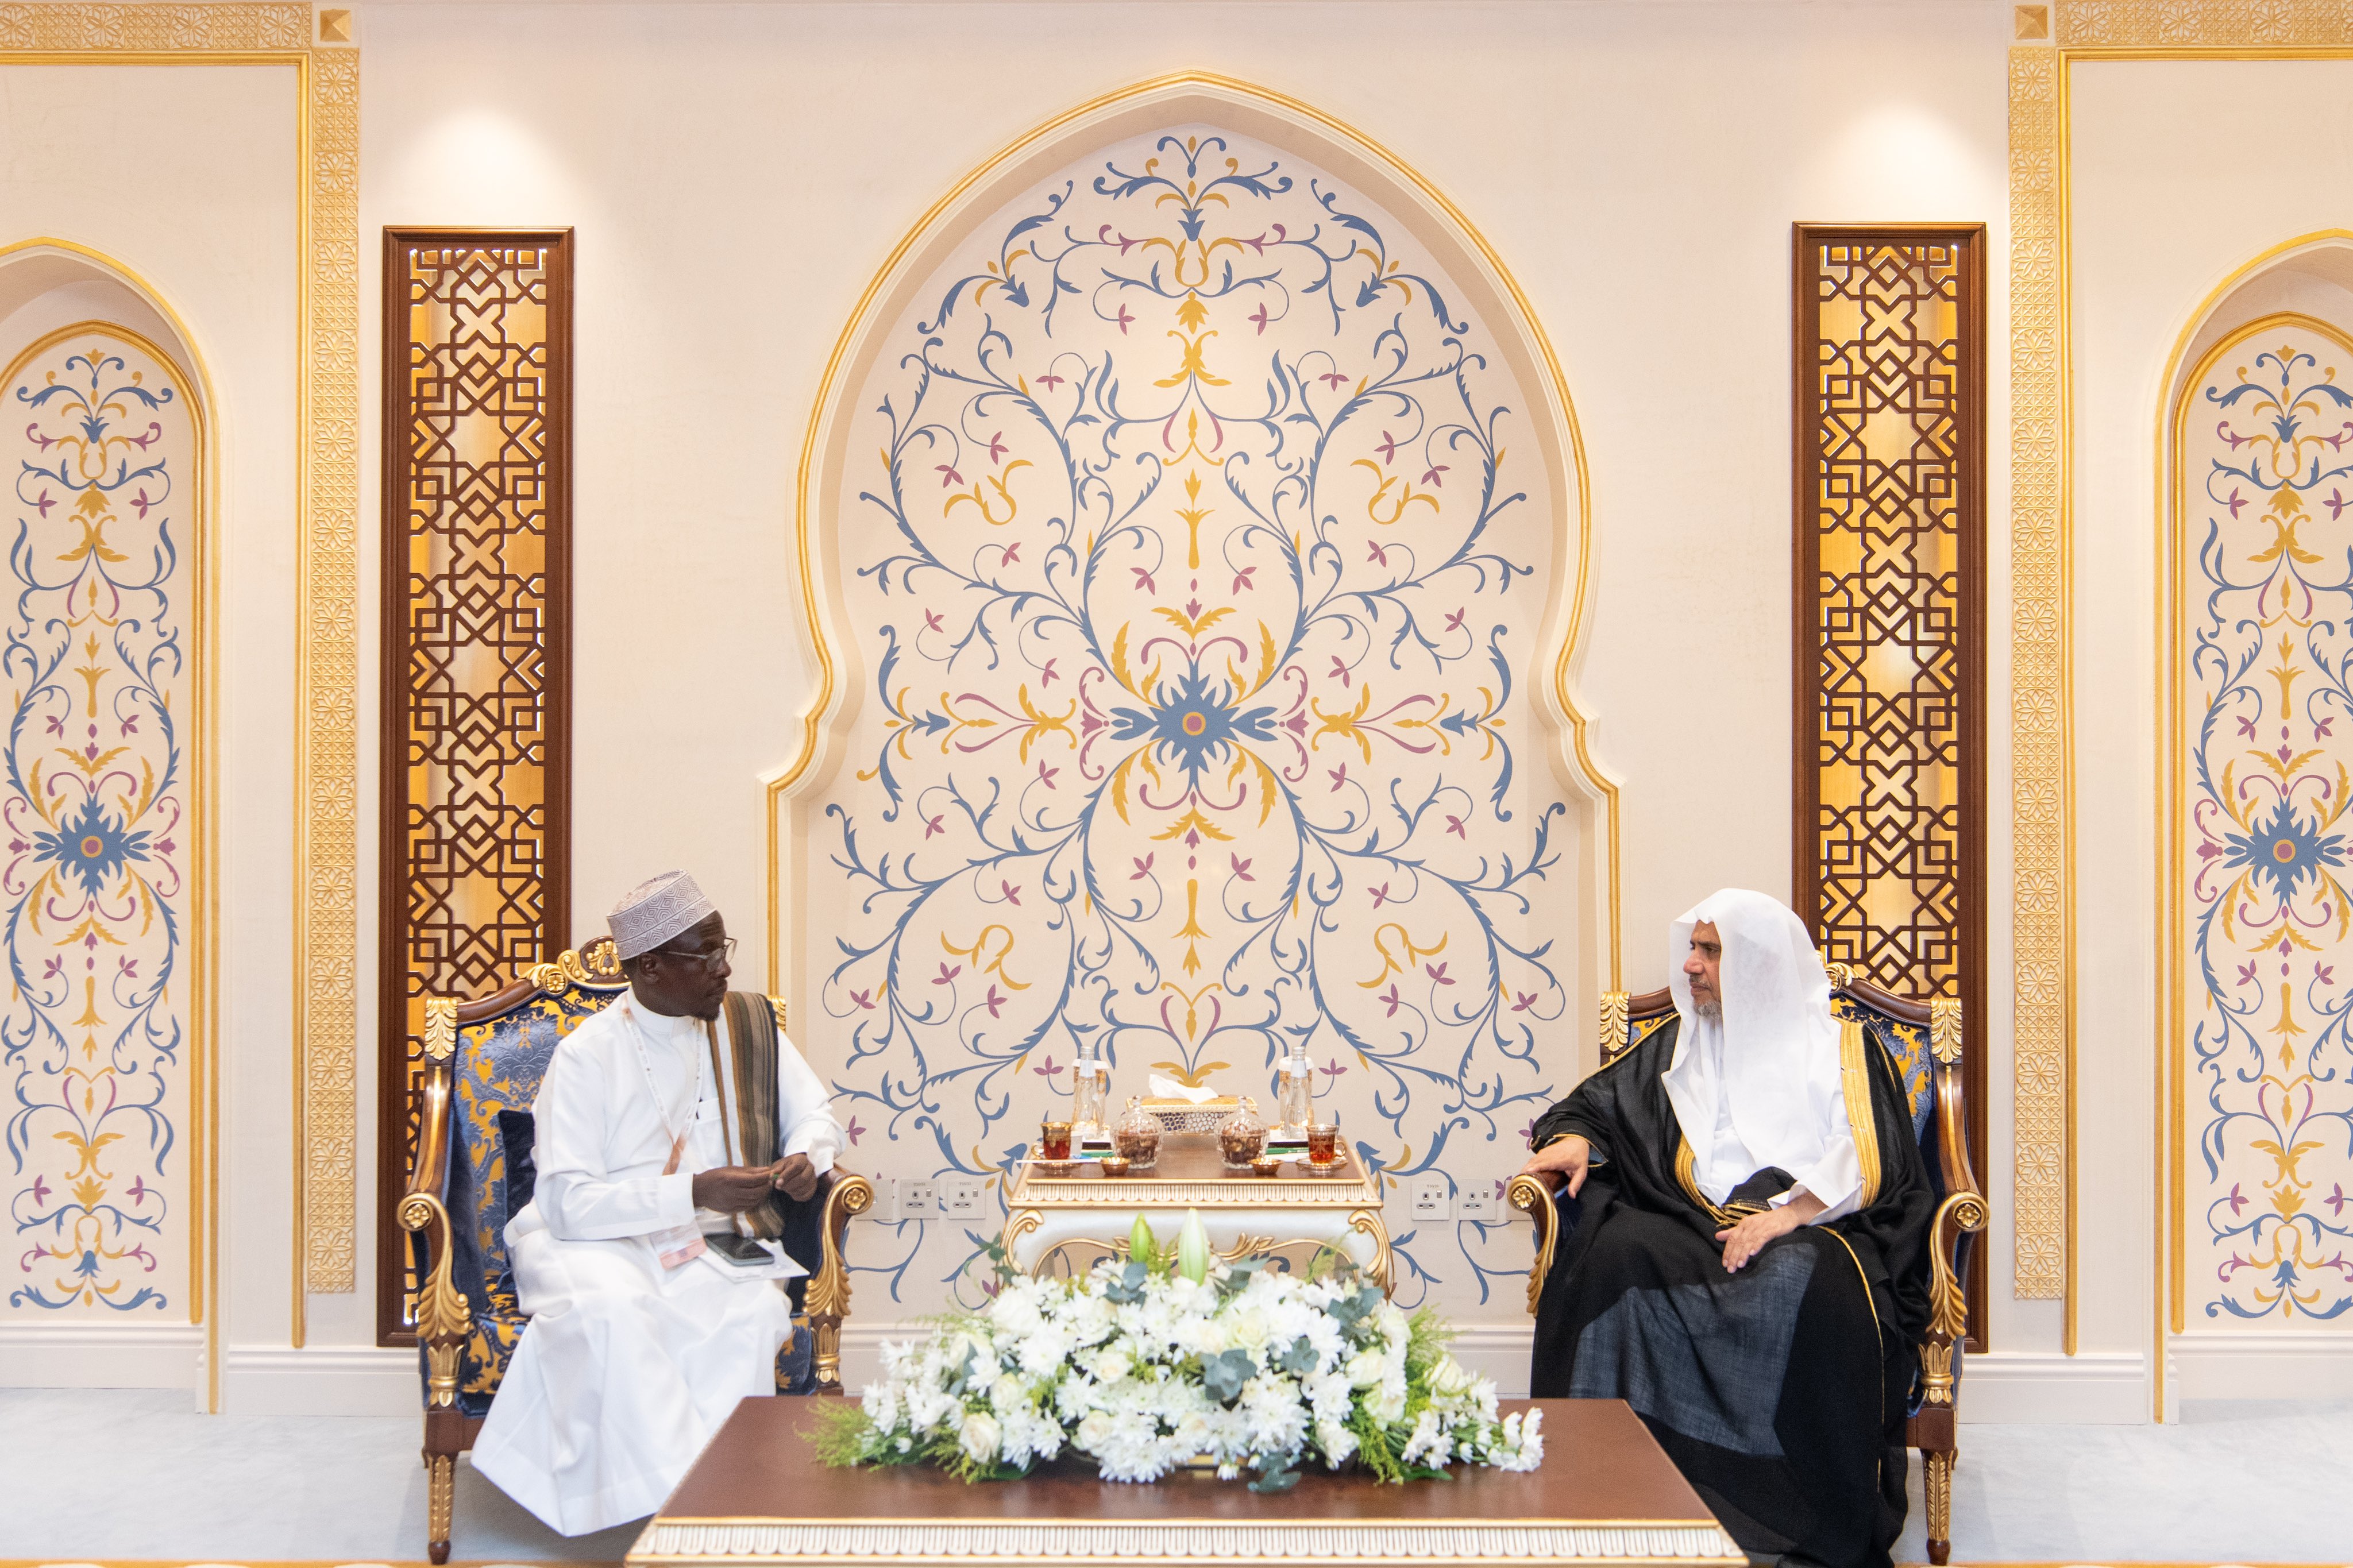 His Excellency Sheikh Dr. Mohammed Al-issa, Secretary-General of the MWL and Chairman of the Organization of Muslim Scholars, met with His Excellency Al-Hajj Hassan Ole Naado, Chairman of the Supreme Council of Kenya Muslims